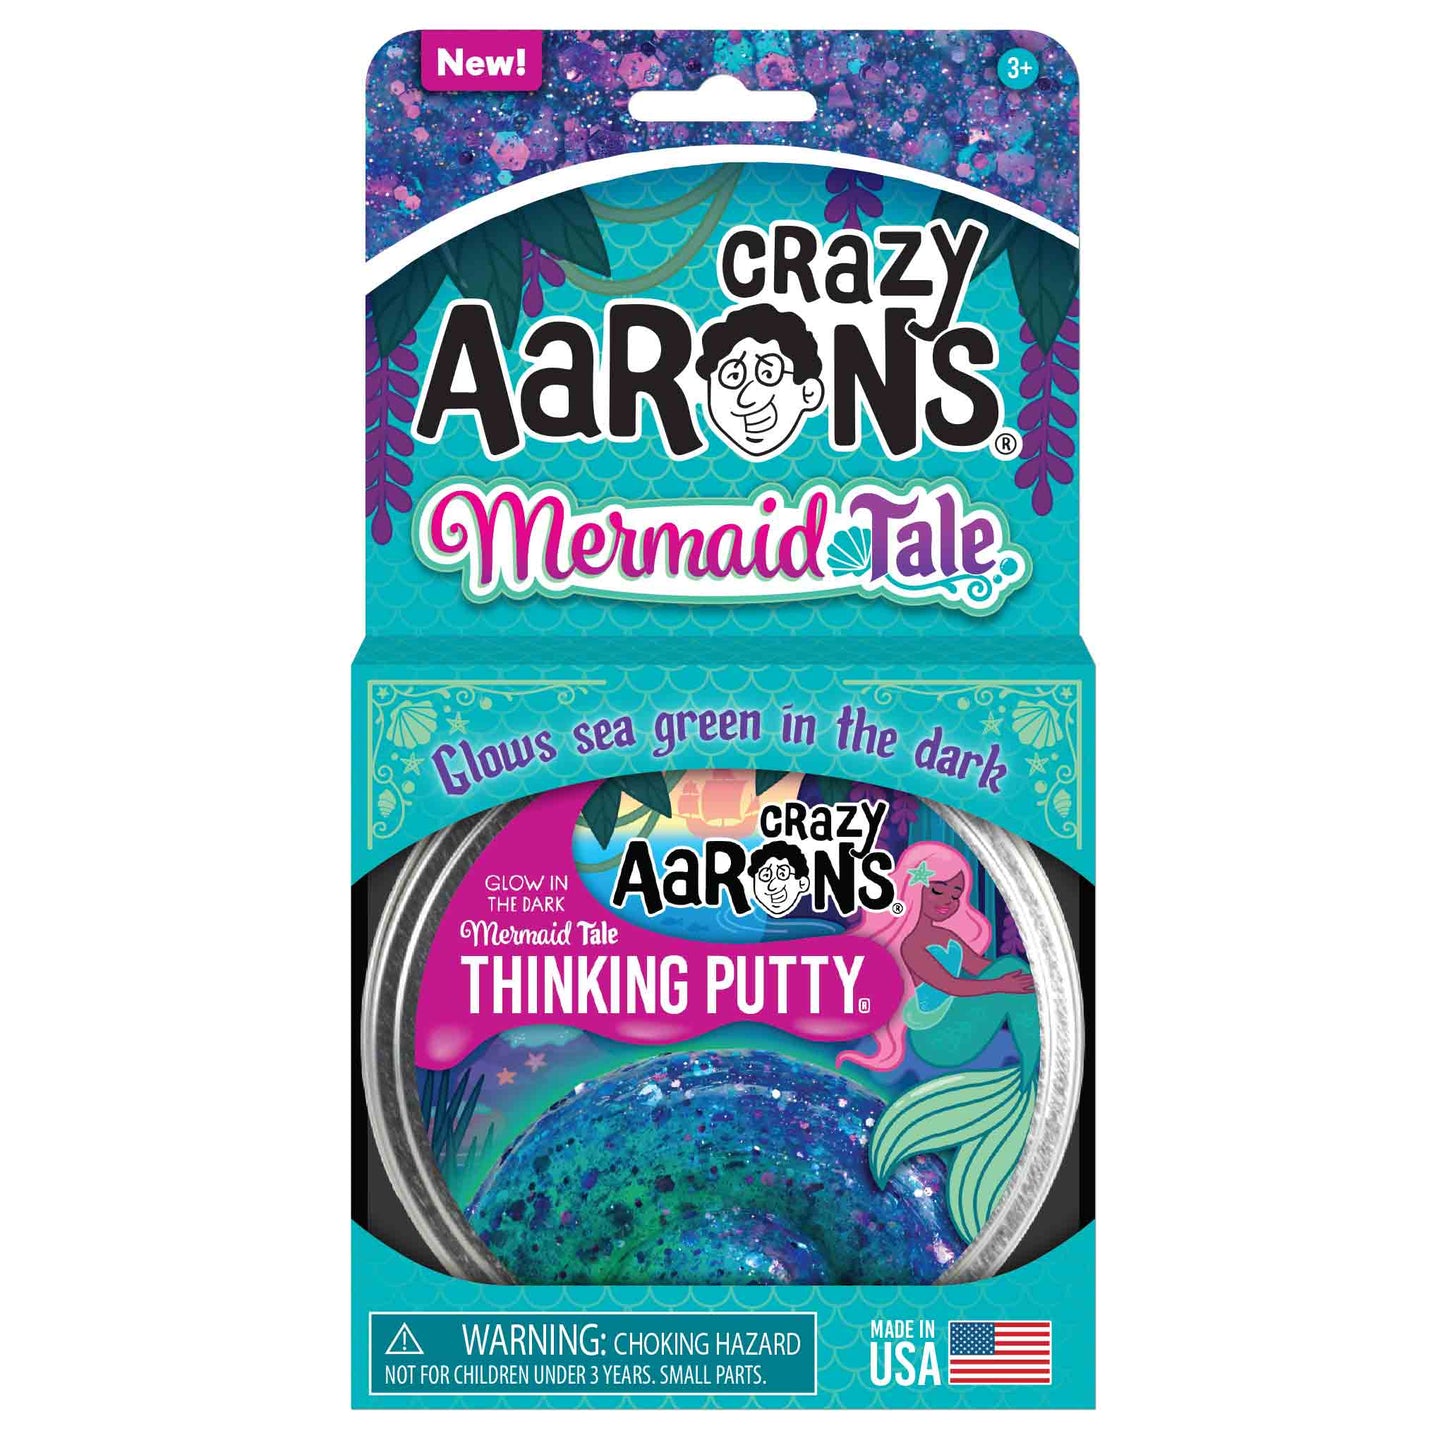 Mermaid tale glowbrights thinking putty. Crazy Aaron’s